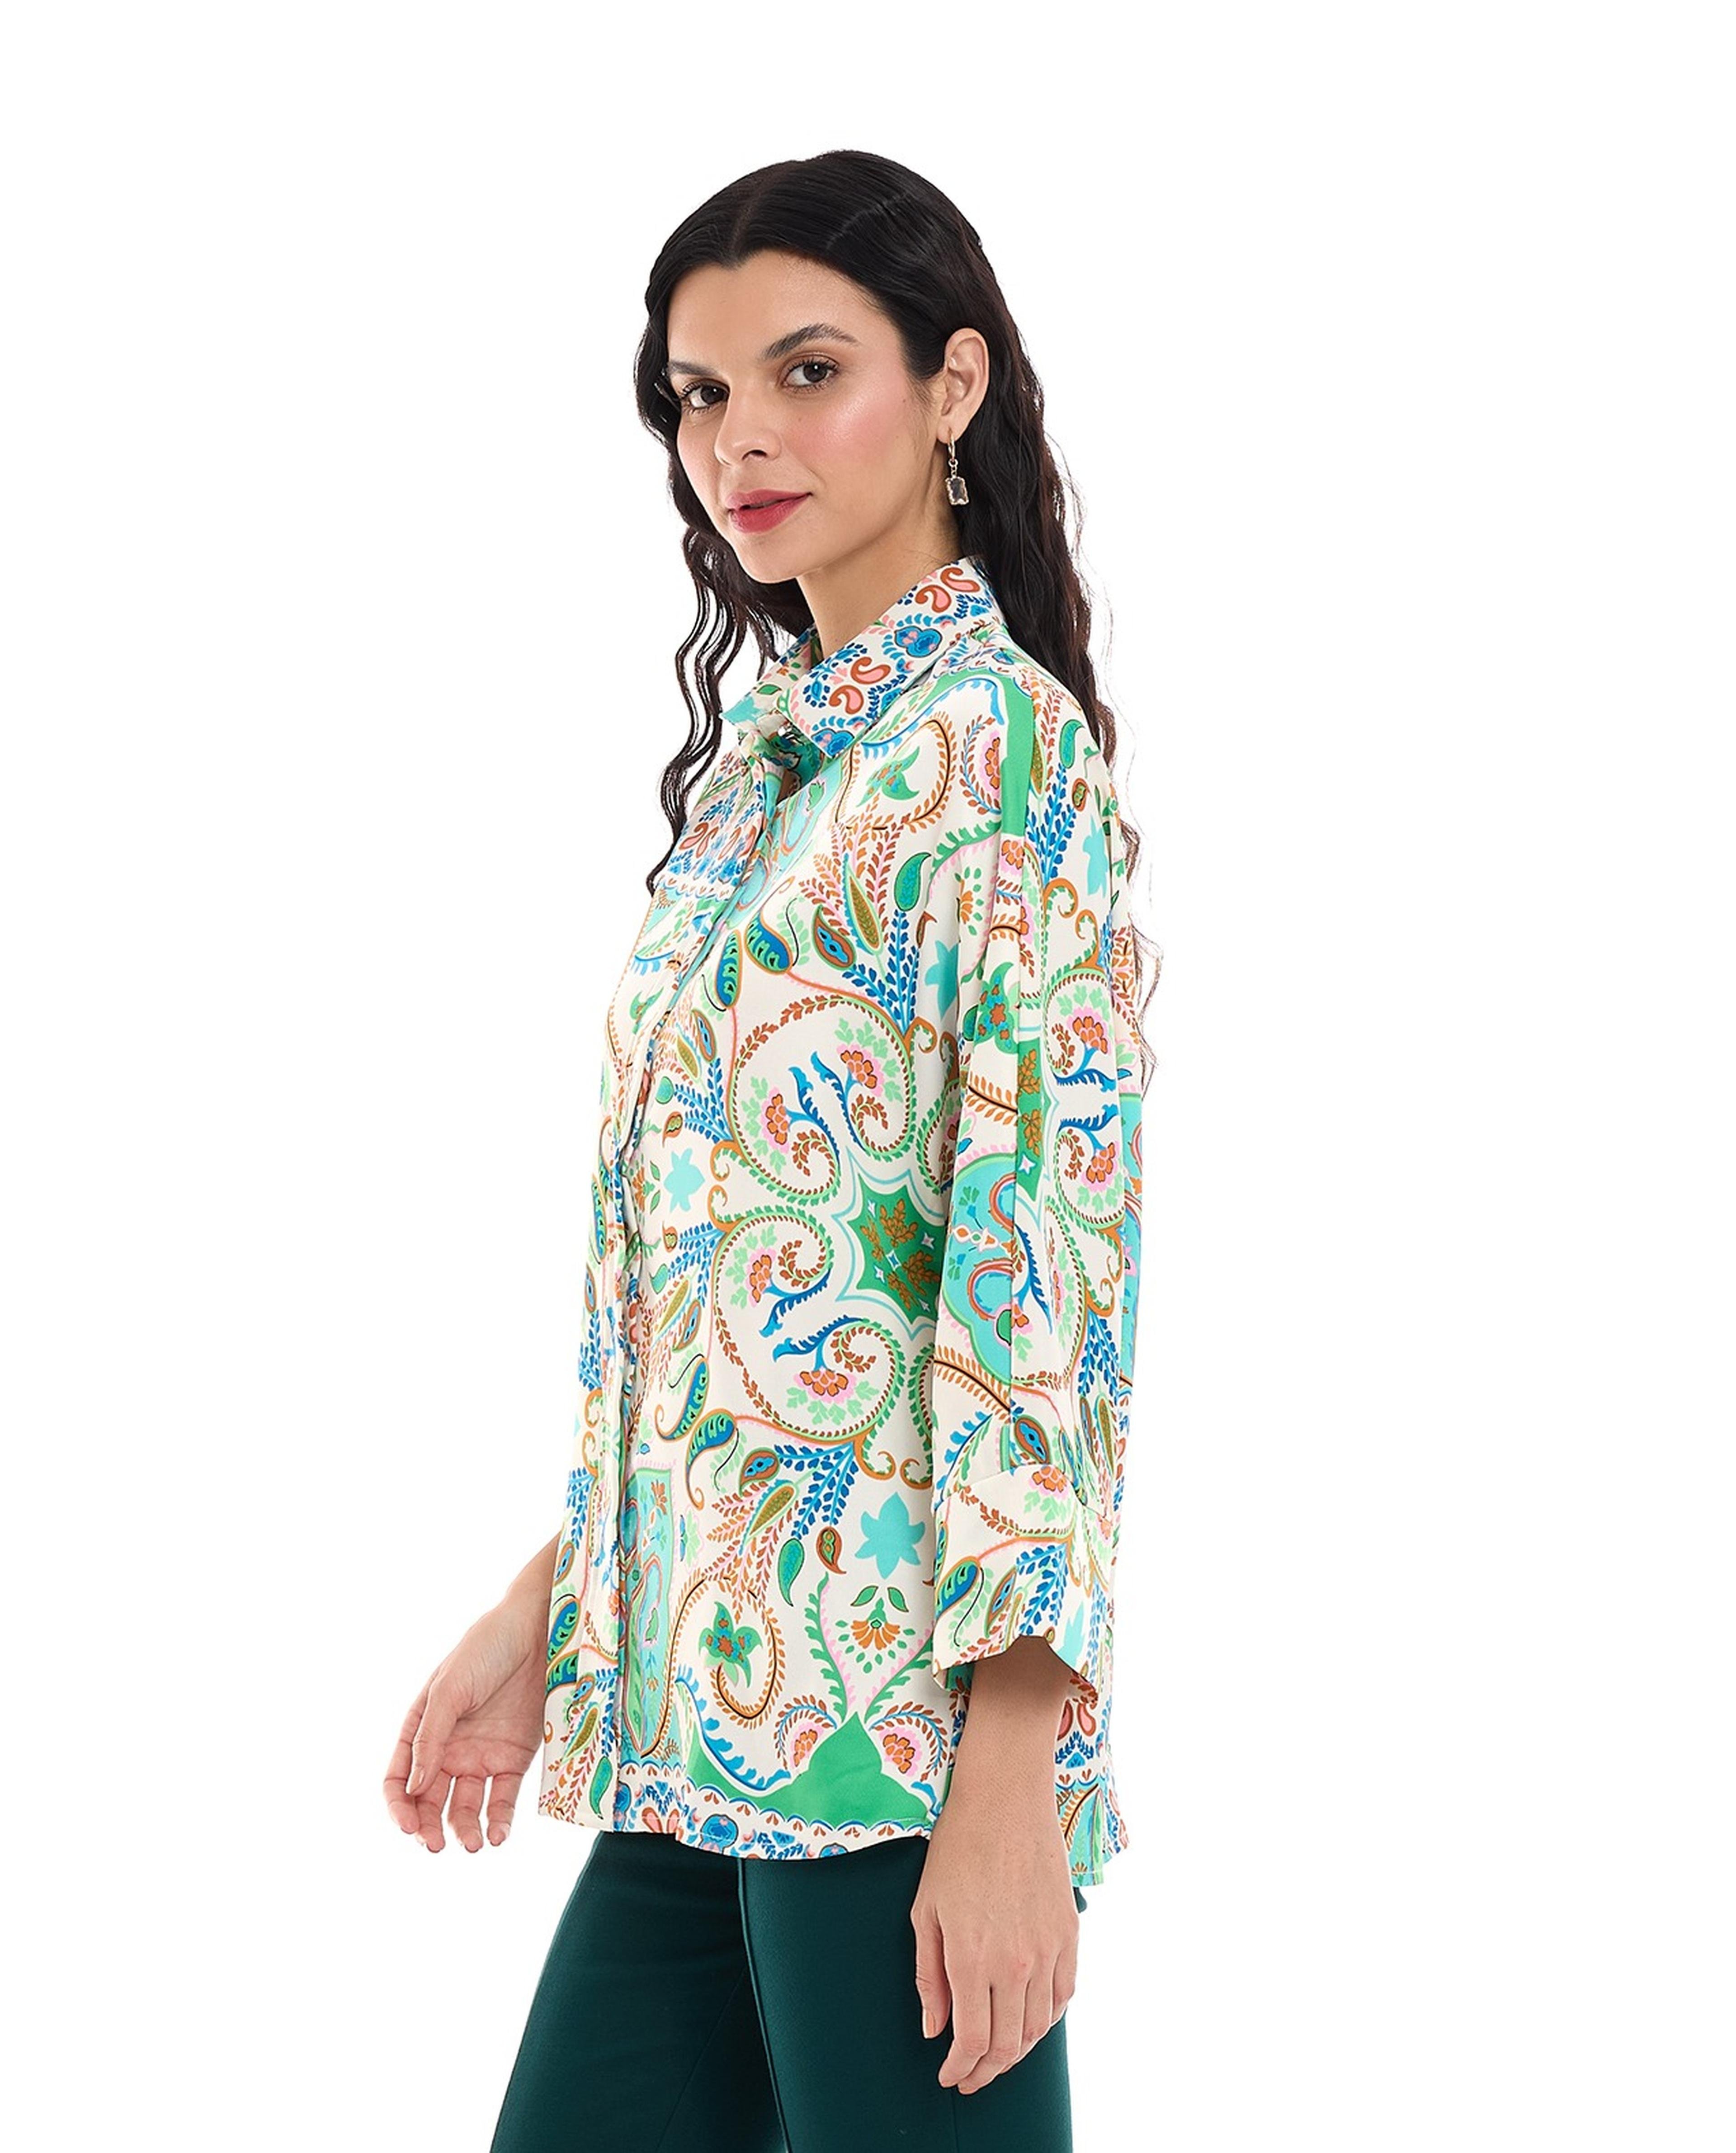 Paisley Patterned Shirt with Classic Collar and Long Sleeves